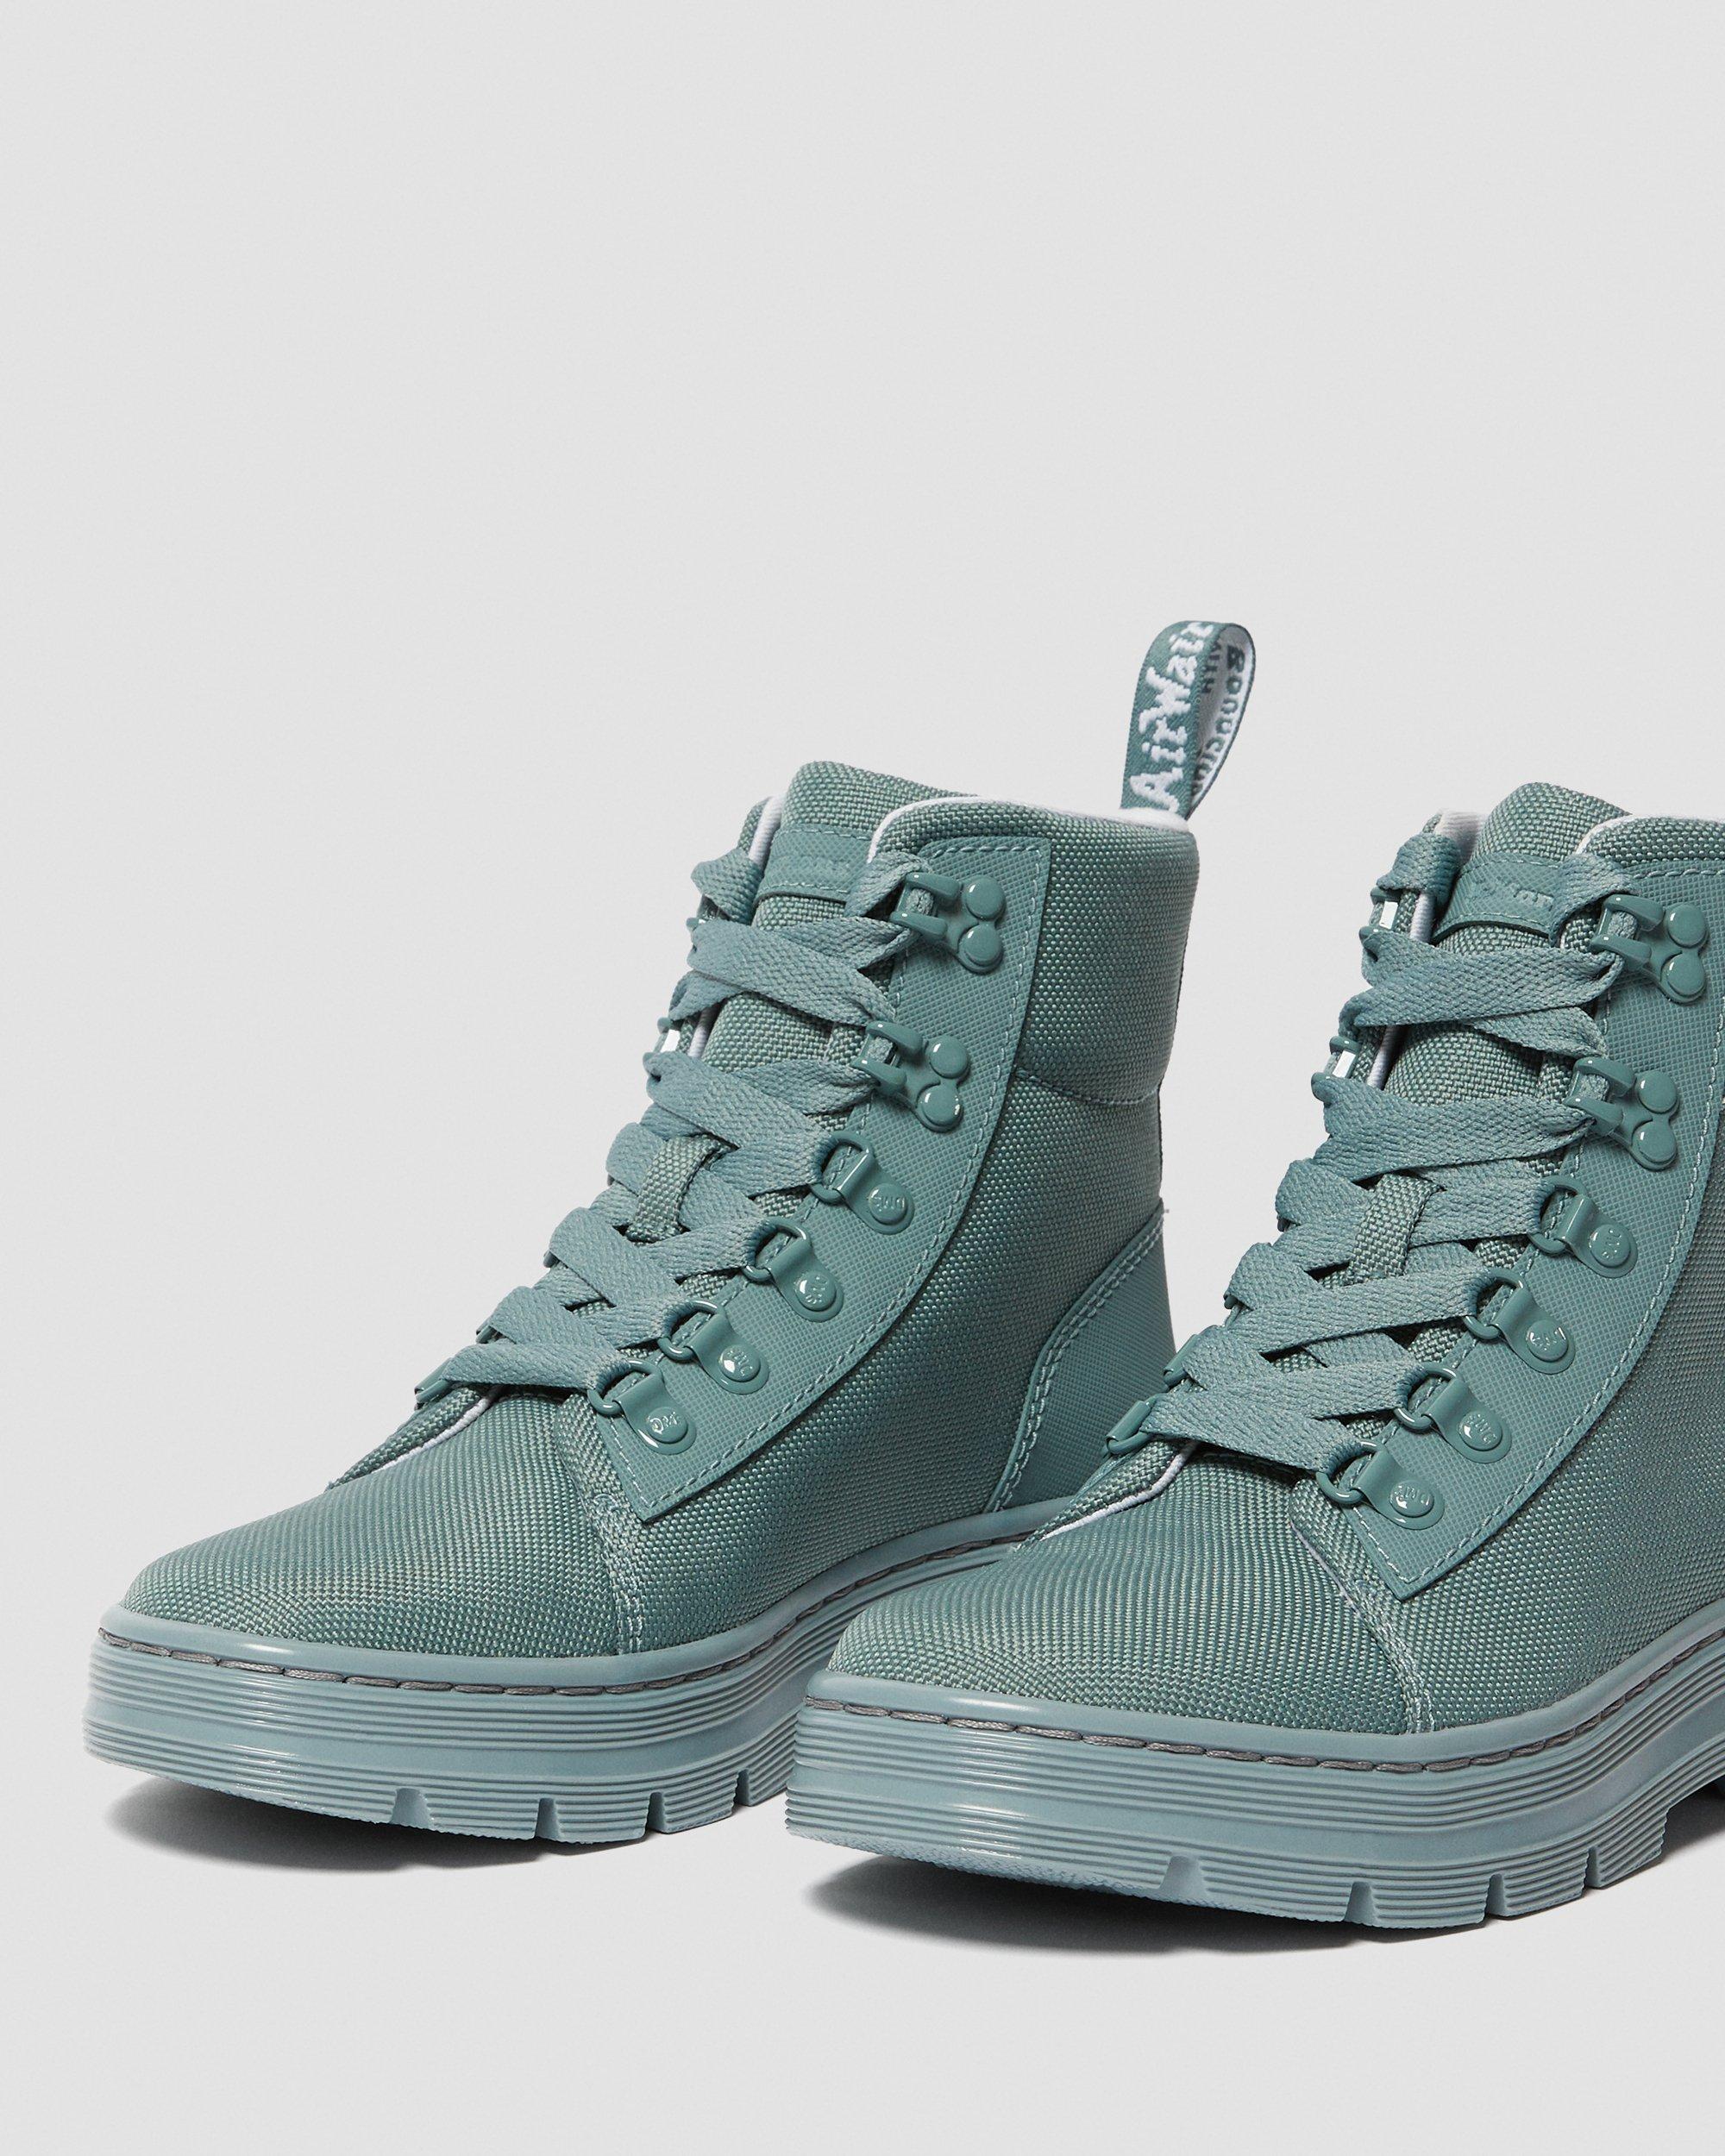 COMBS TECH UTILITY BOOTS in Teal+Grey